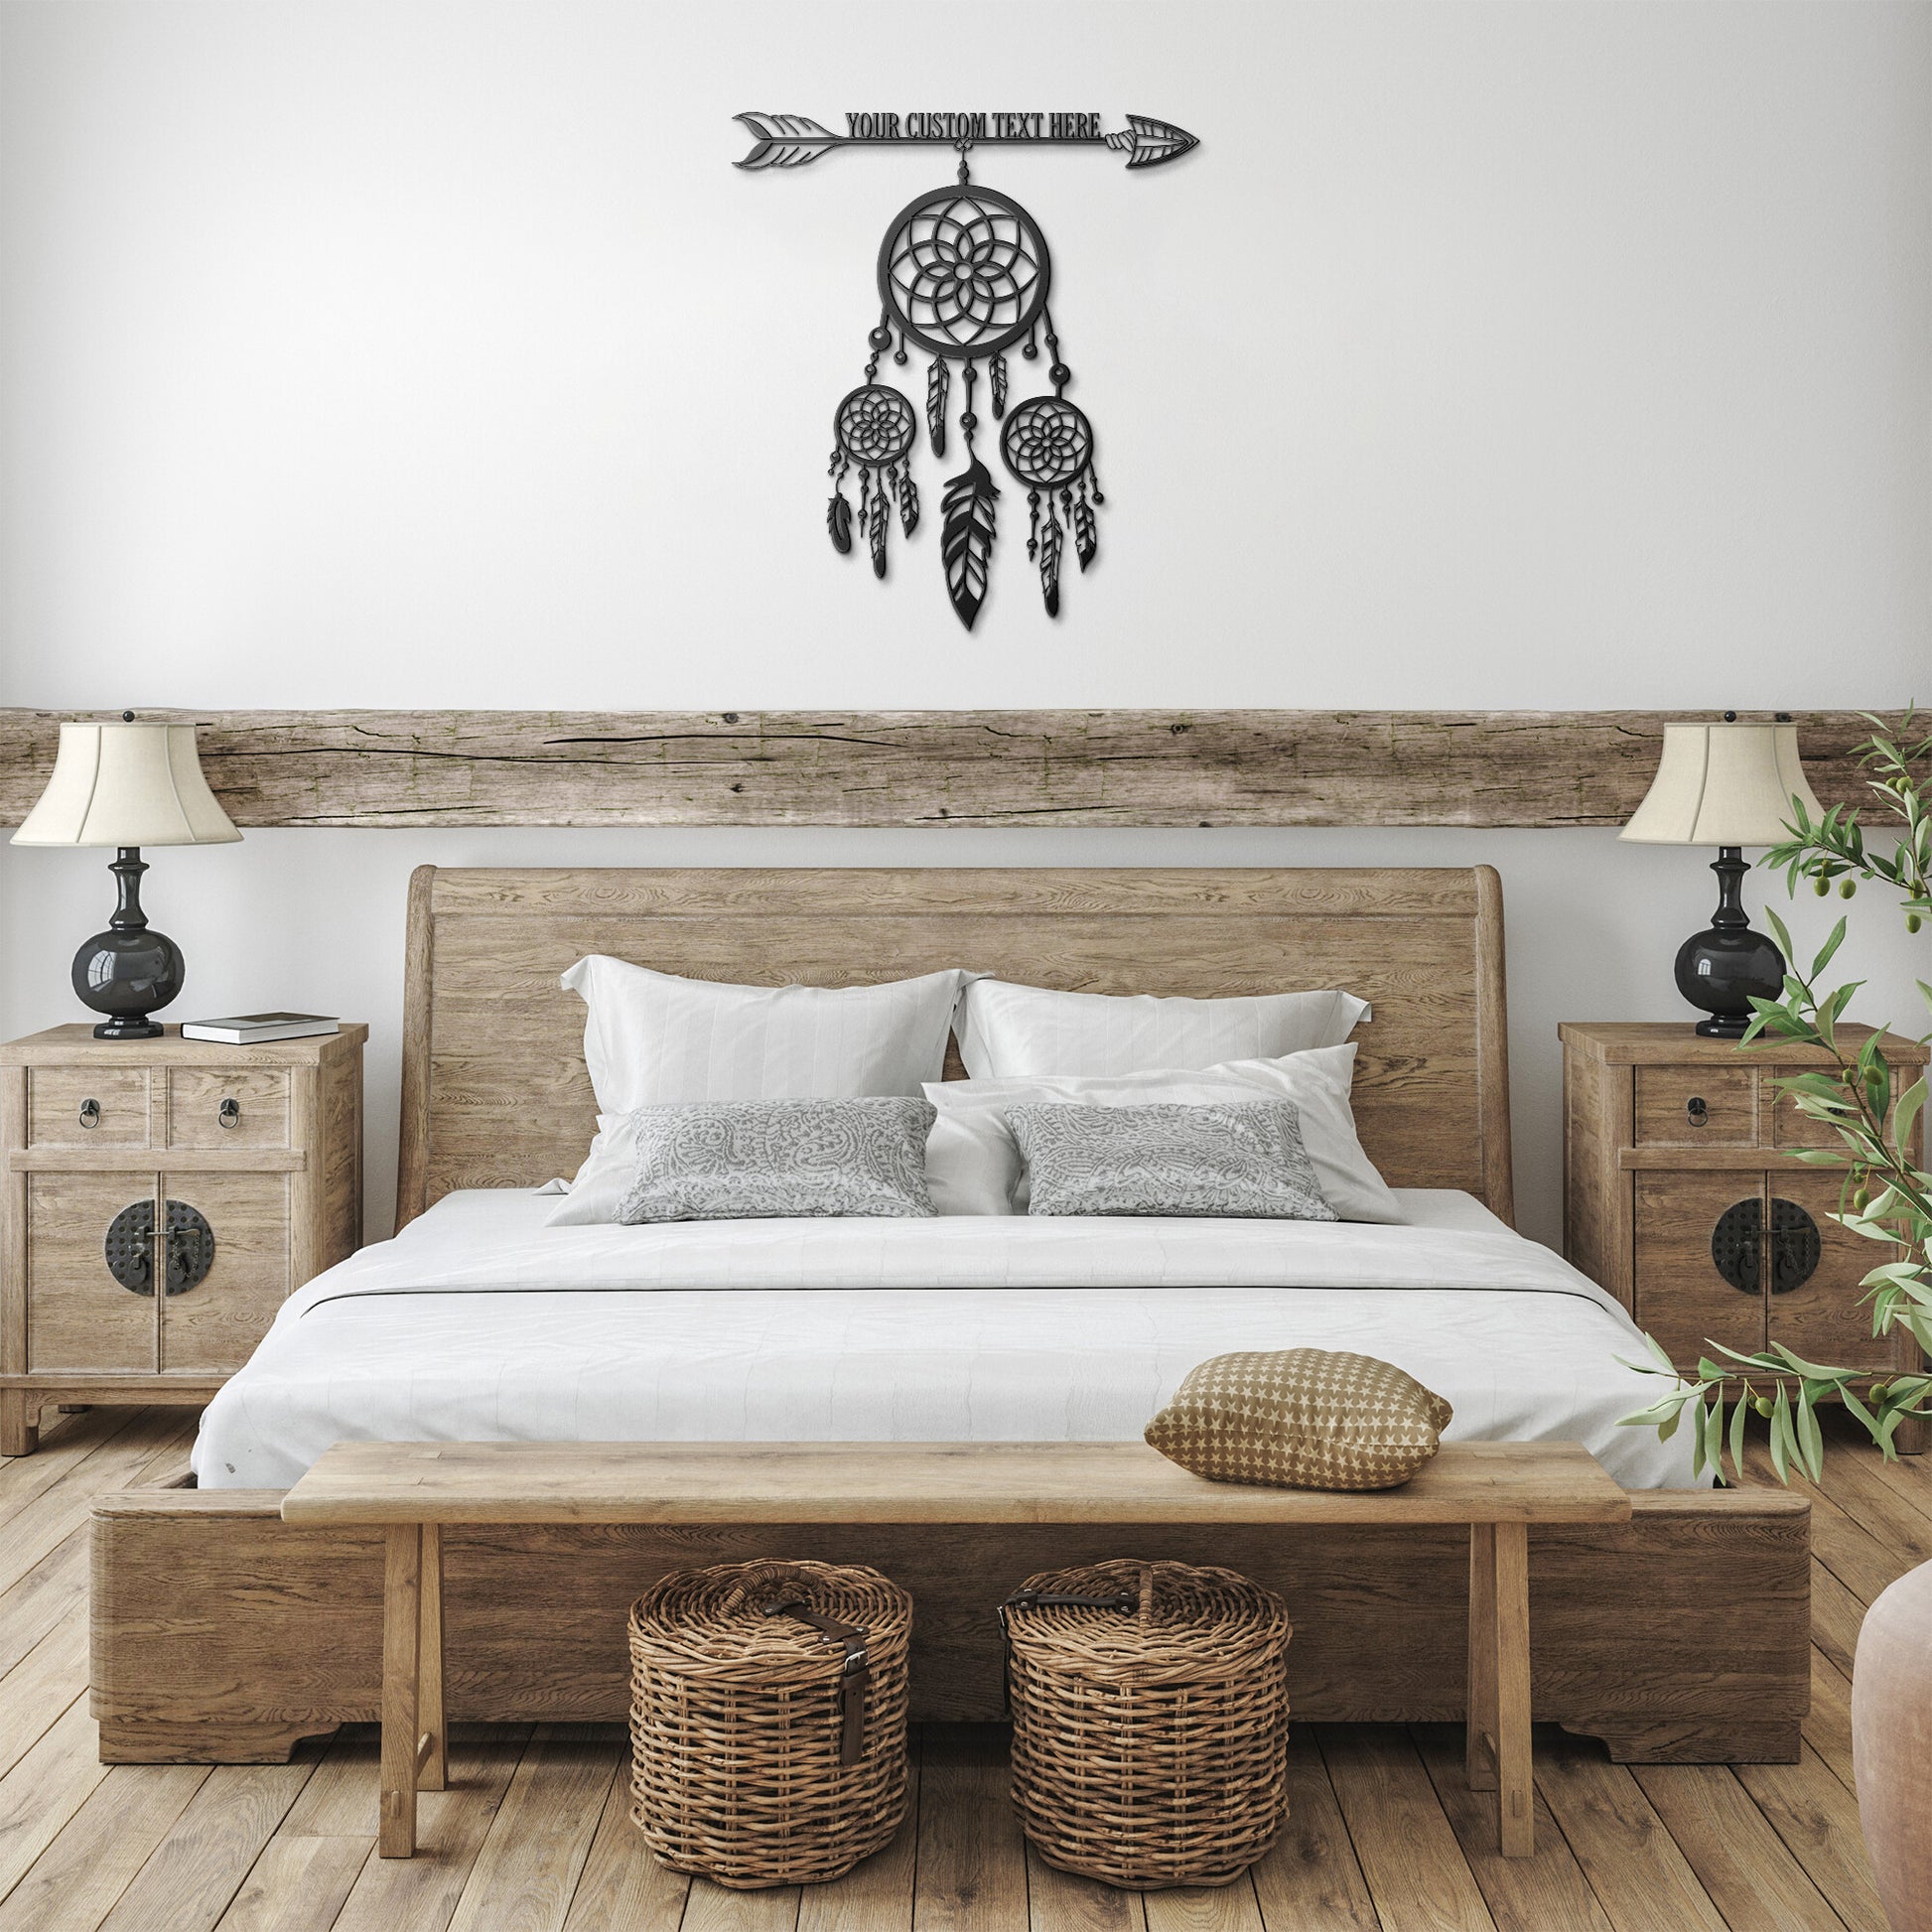 Personalized dreamcatcher with feathers and custom text black metal sign